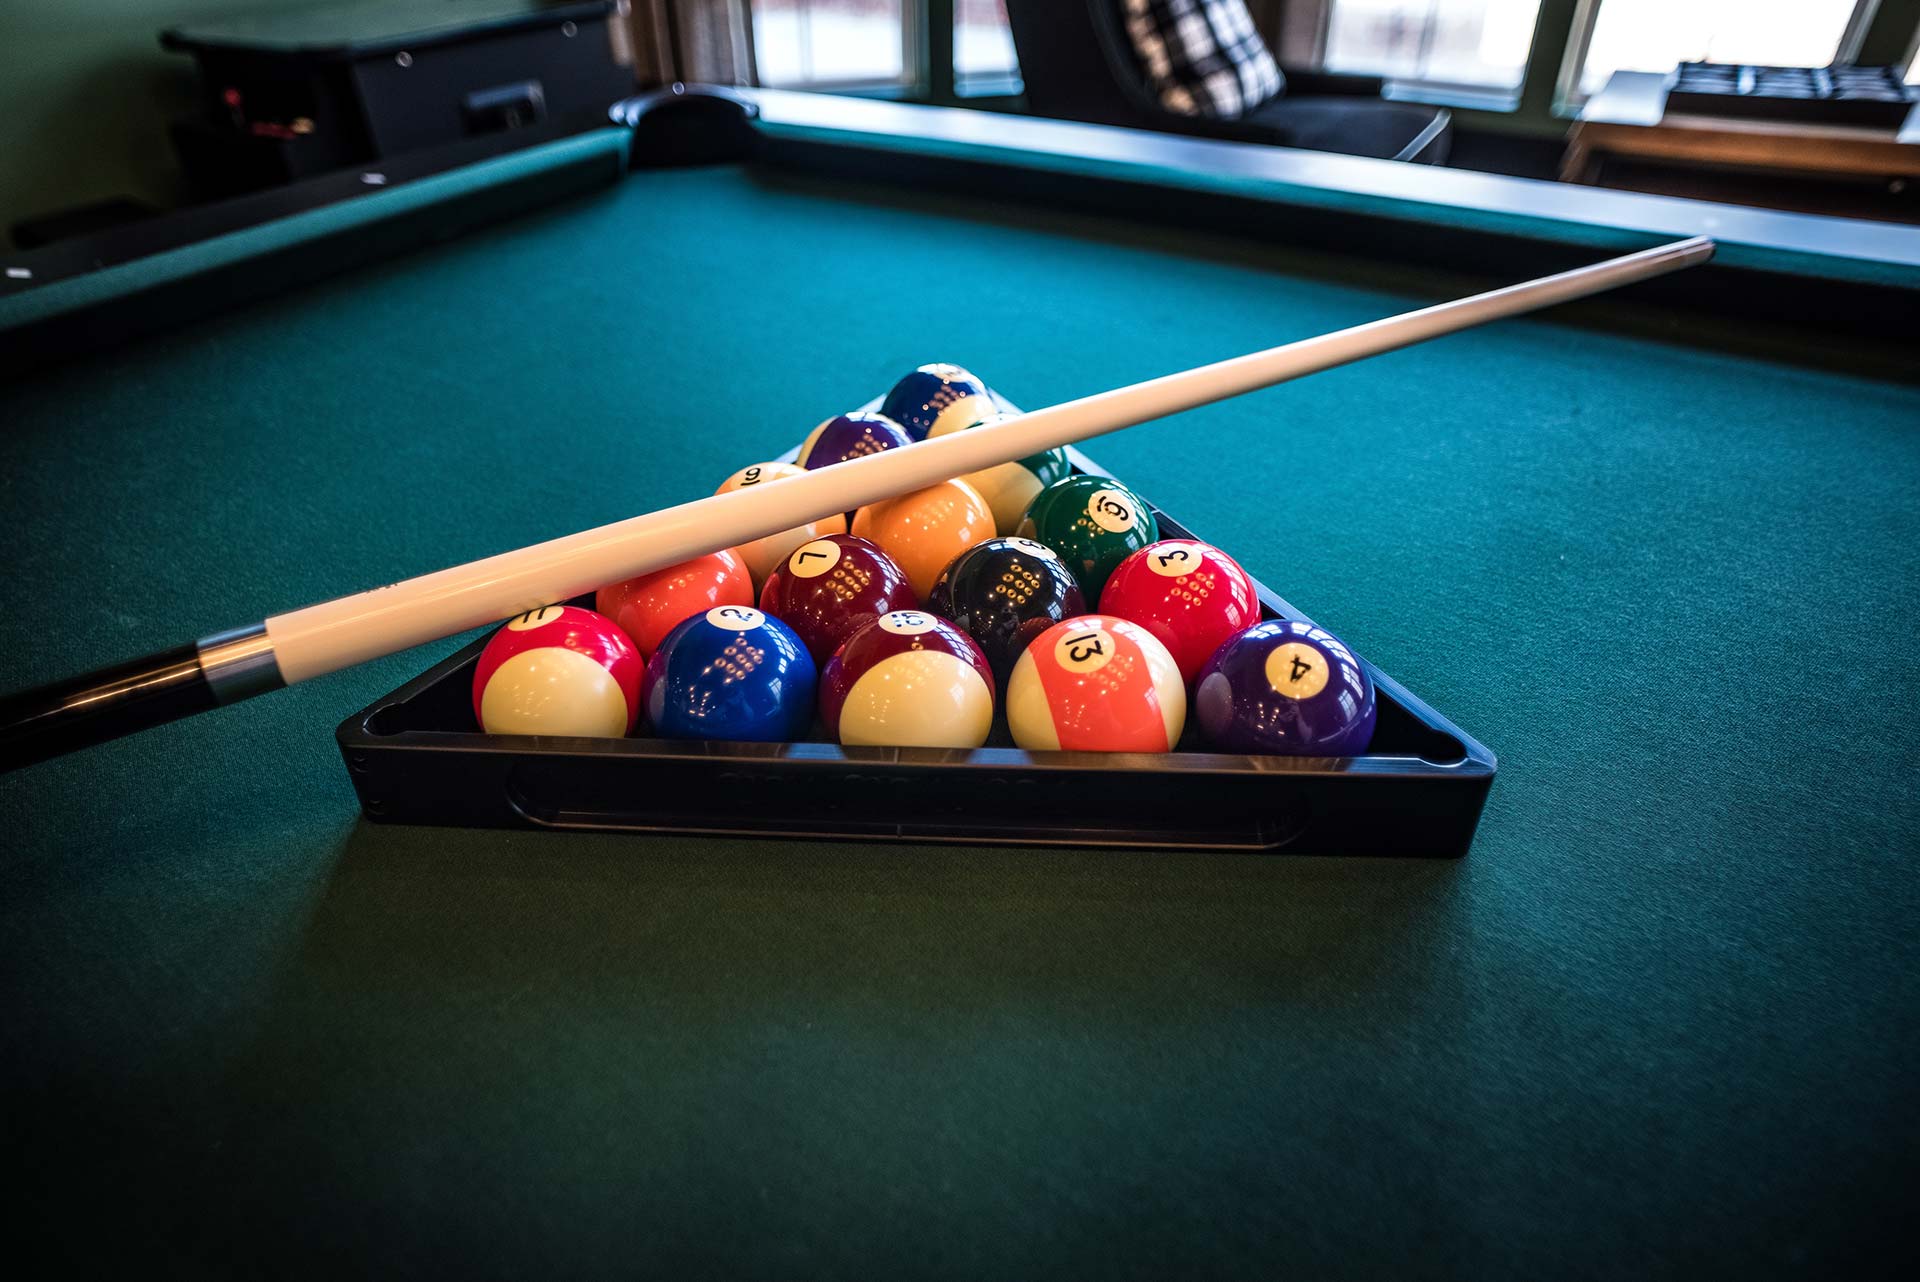 Pool table with balls racked in the triangle and cue resting on top